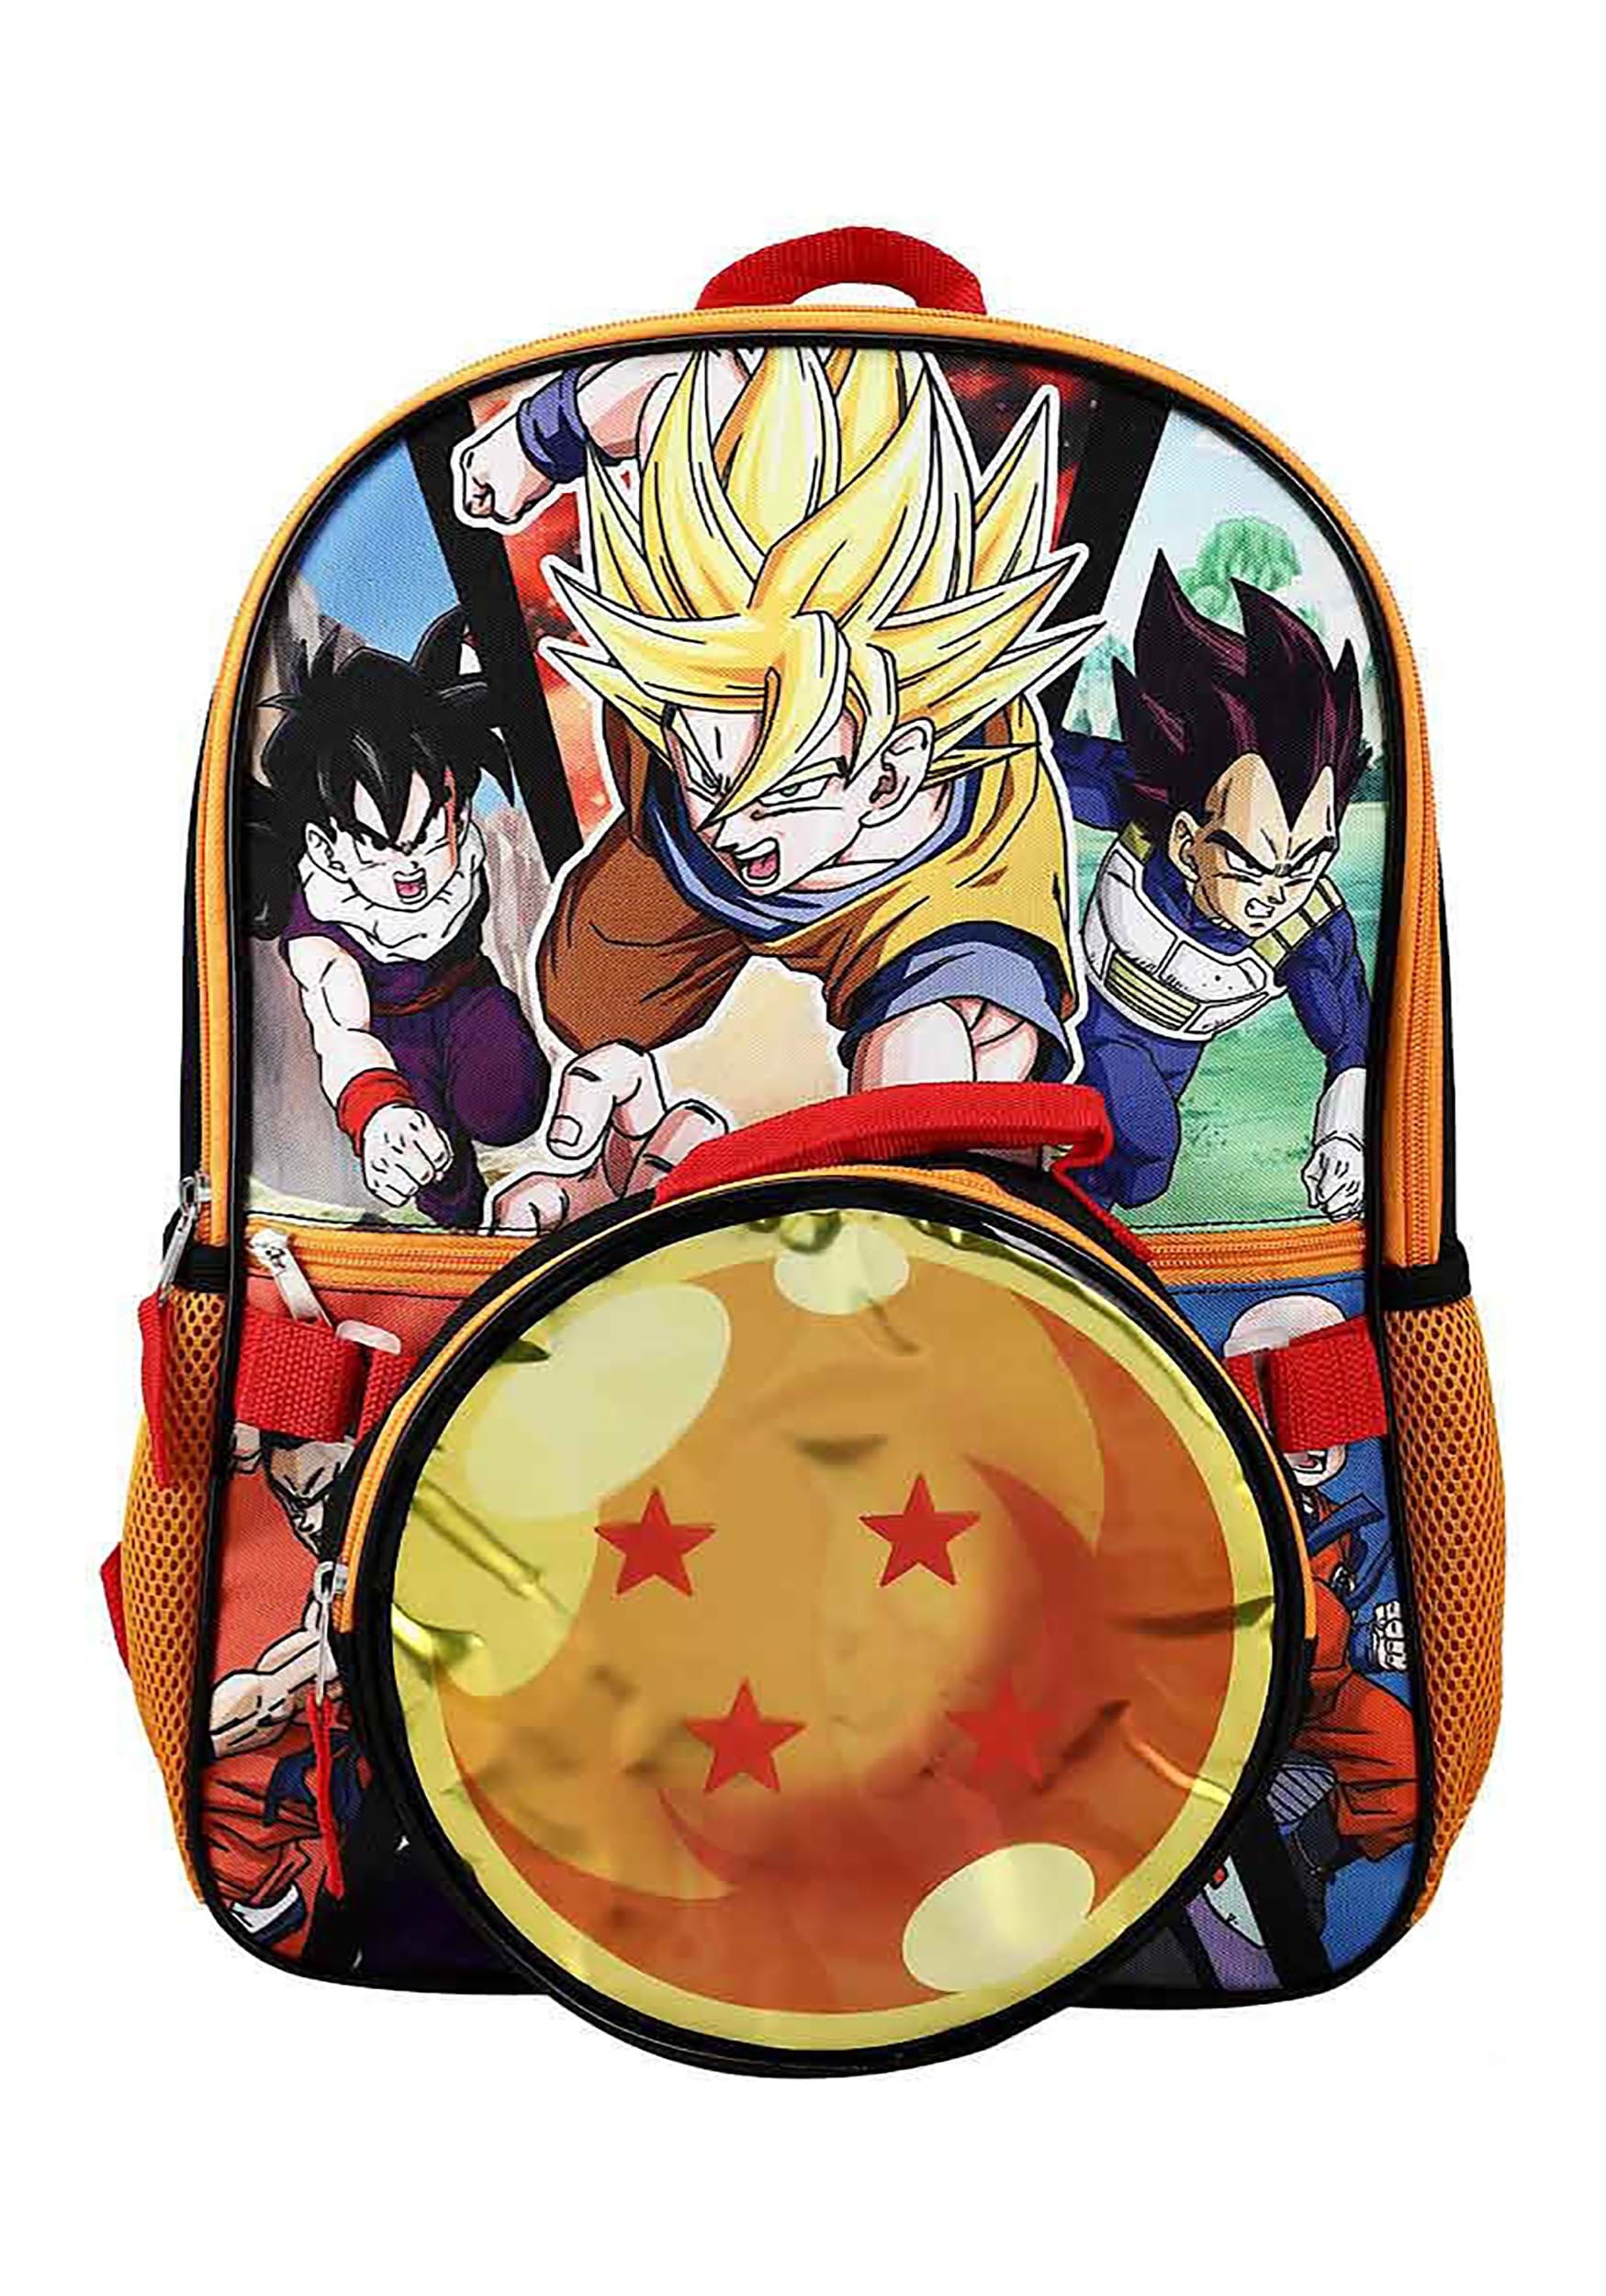 Dragon Ball Z Sublimated Print Backpack w/ Lunchbox